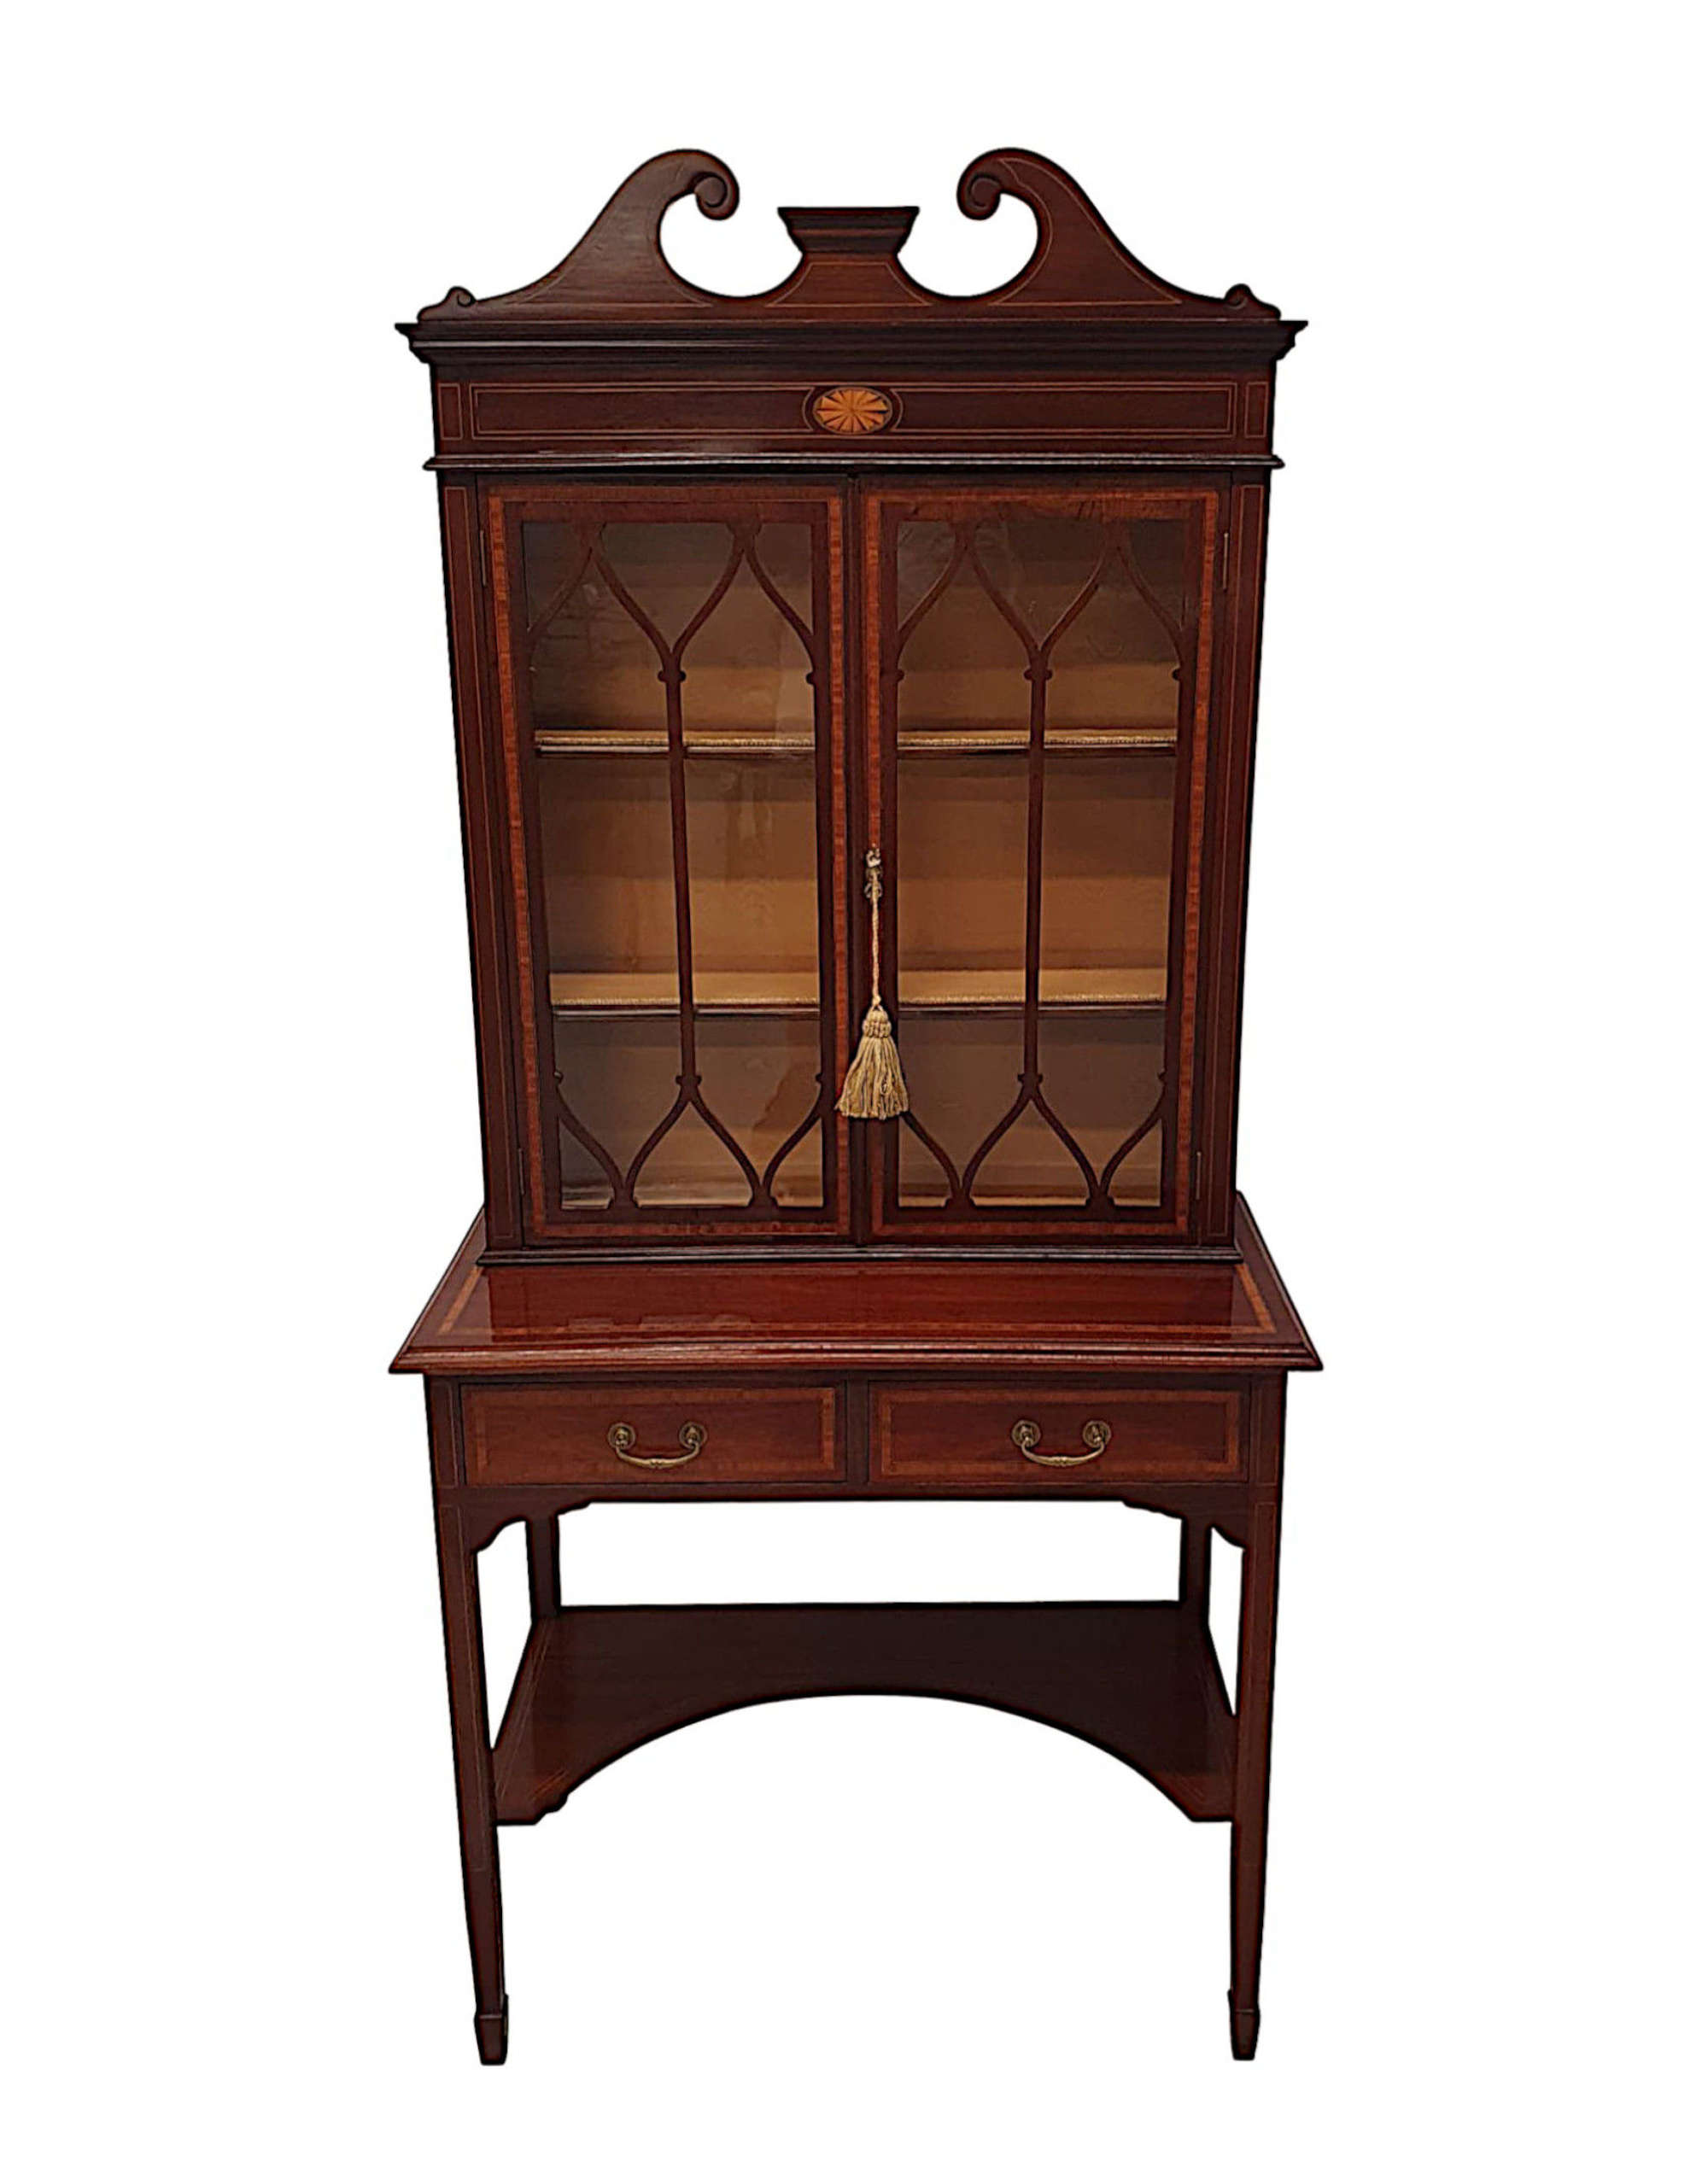 A Fabulous Edwardian Inlaid Display Case Or Antique Bookcase